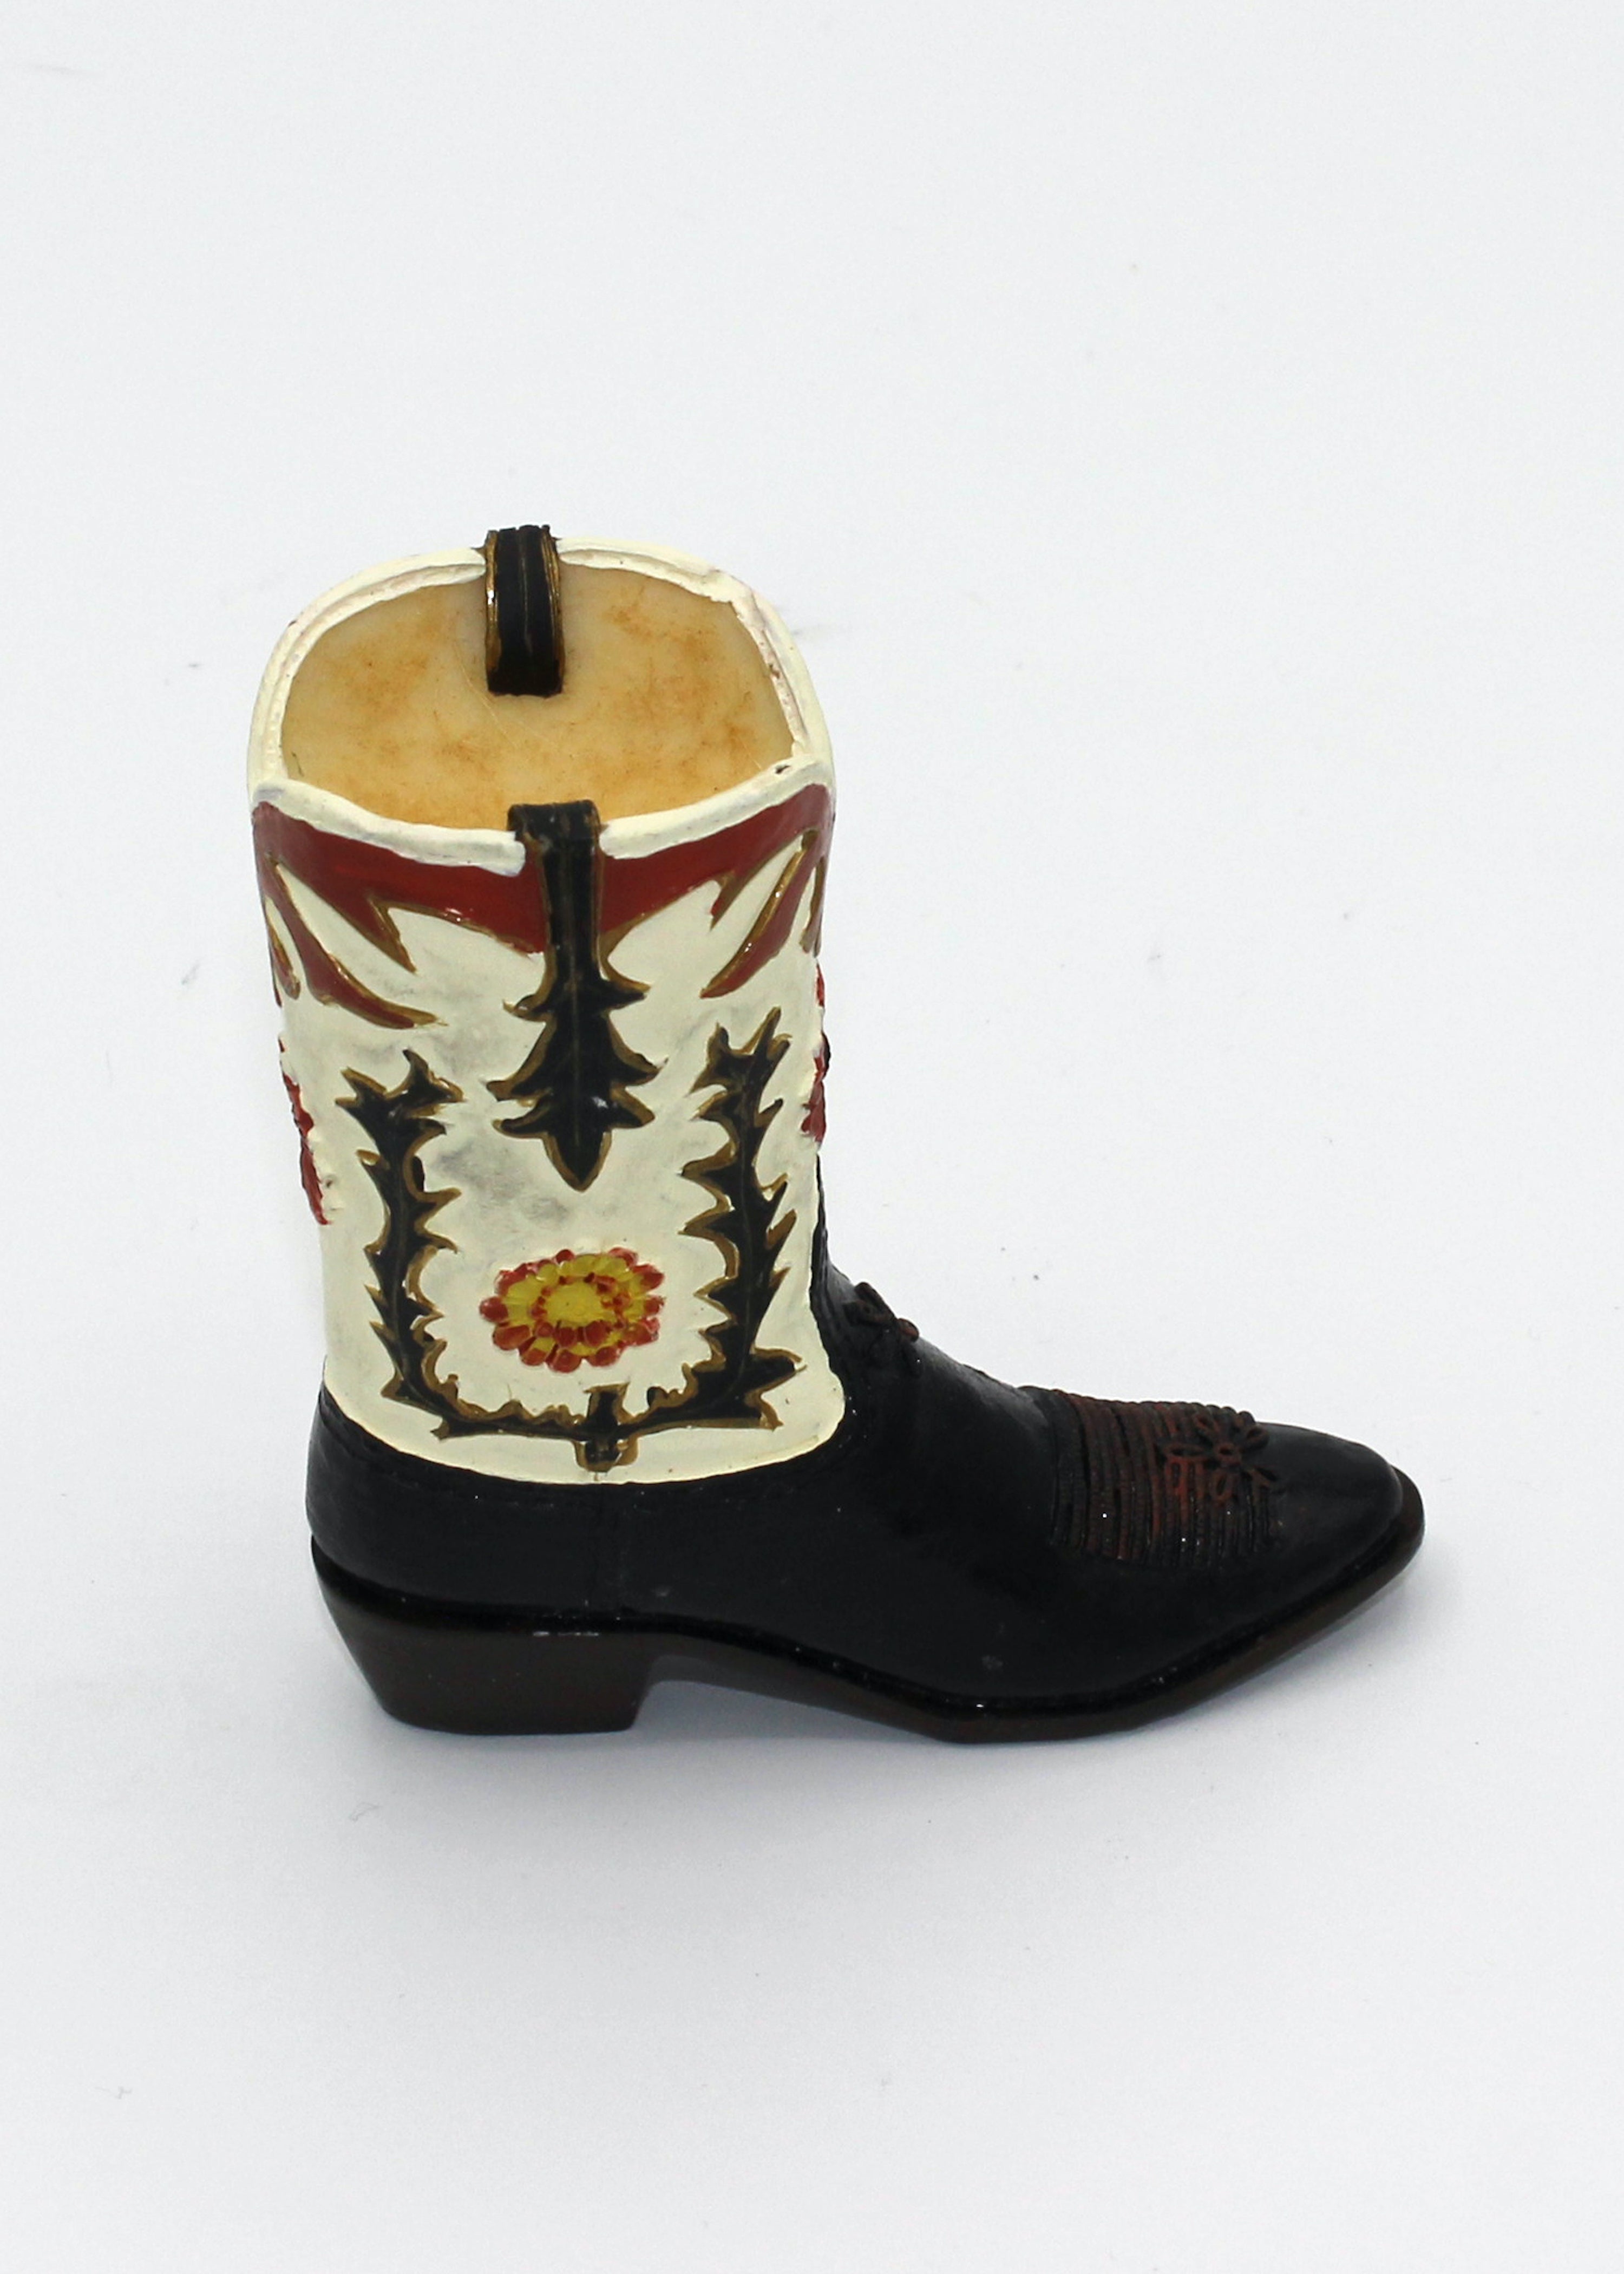 White Mini Cowboy Boot Paperweight